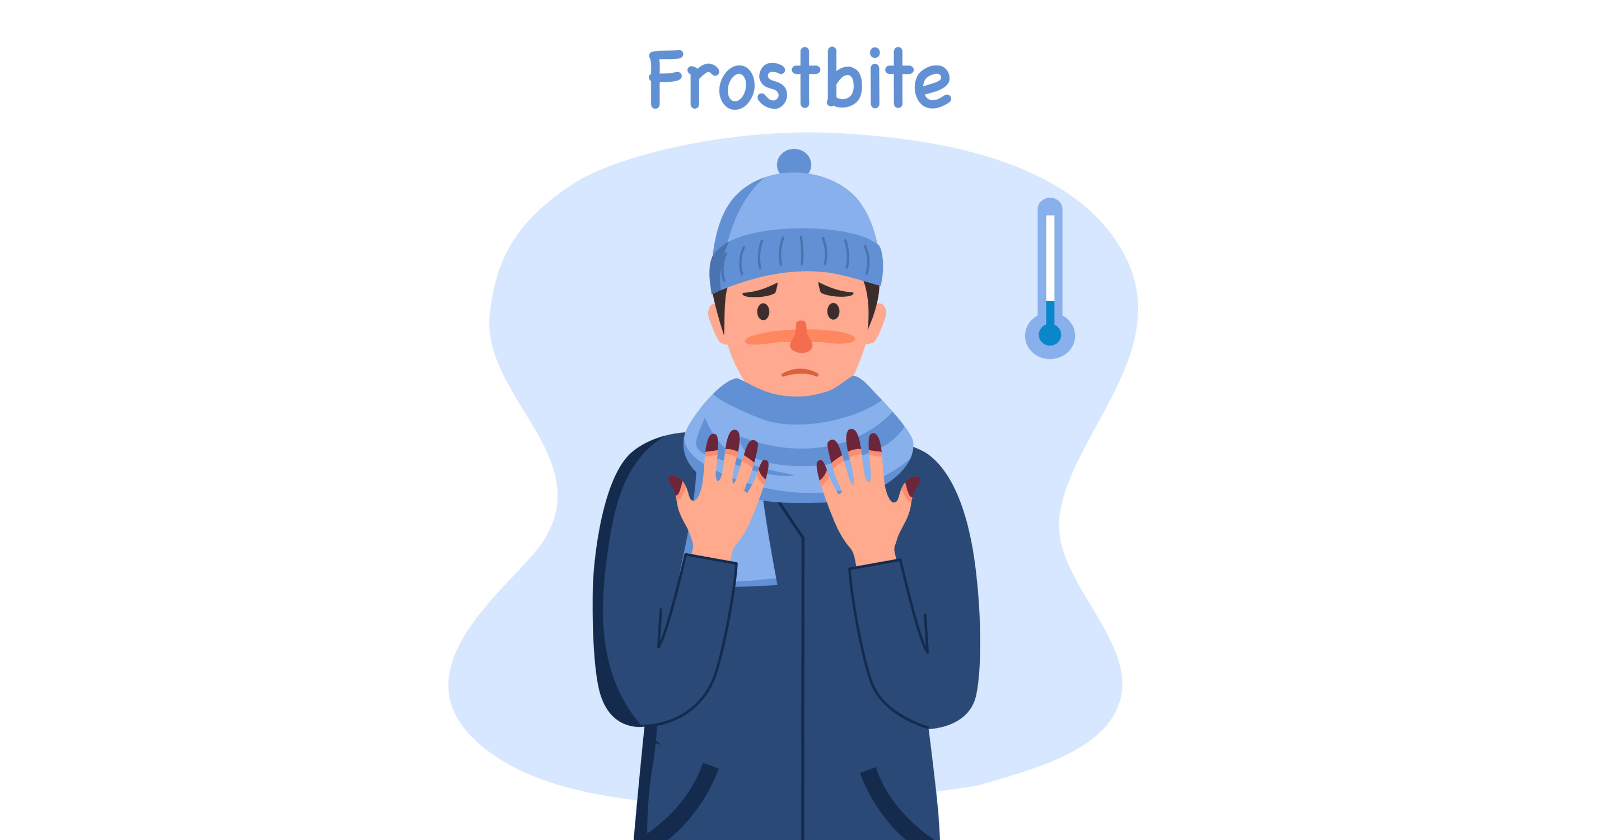 Frostbite: Symptoms, Causes, & First Aid Guide